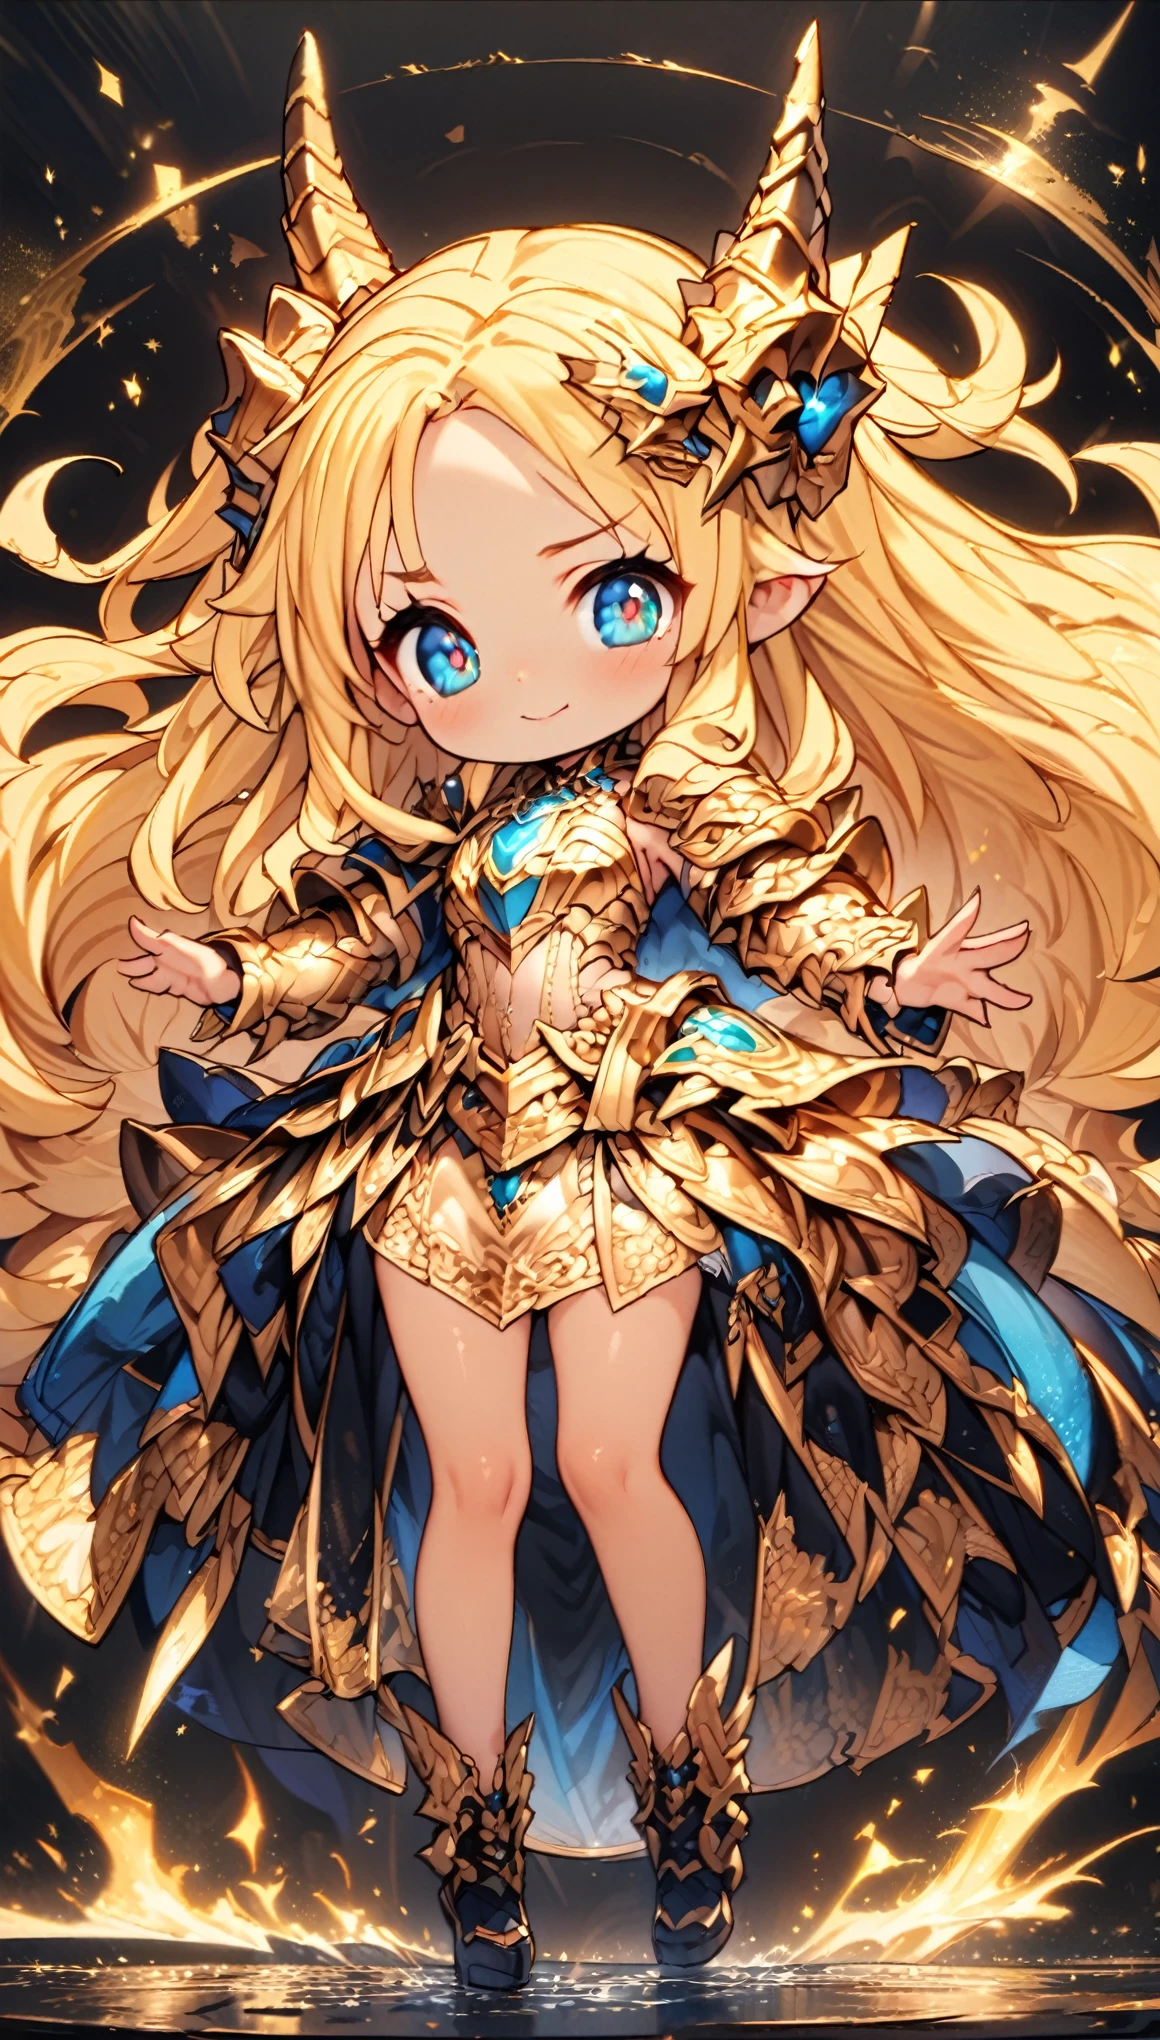 masterpiece, Best Quality, Very detailed, High resolution, Japanese anime、1girl, Blonde Hair、（Medium length hair：1.4）、Side braid hair, Curly Hair, Wavy Hair、, Drill Hair, Curly Outward Hair, Dragon Horn、（blue eyes：1.5）、（Beautiful detailed eyes：1.4）、Laughter、12 years old、3 heads, original character, Fantasy、（Black Background：1.2）、(full body:1.8)、Beautiful fingers, Are standing、（Gold Lace Frill Armor Dress：1.5）、（Jeweled Headgear：1.5）、Photographed from the front, View your viewers